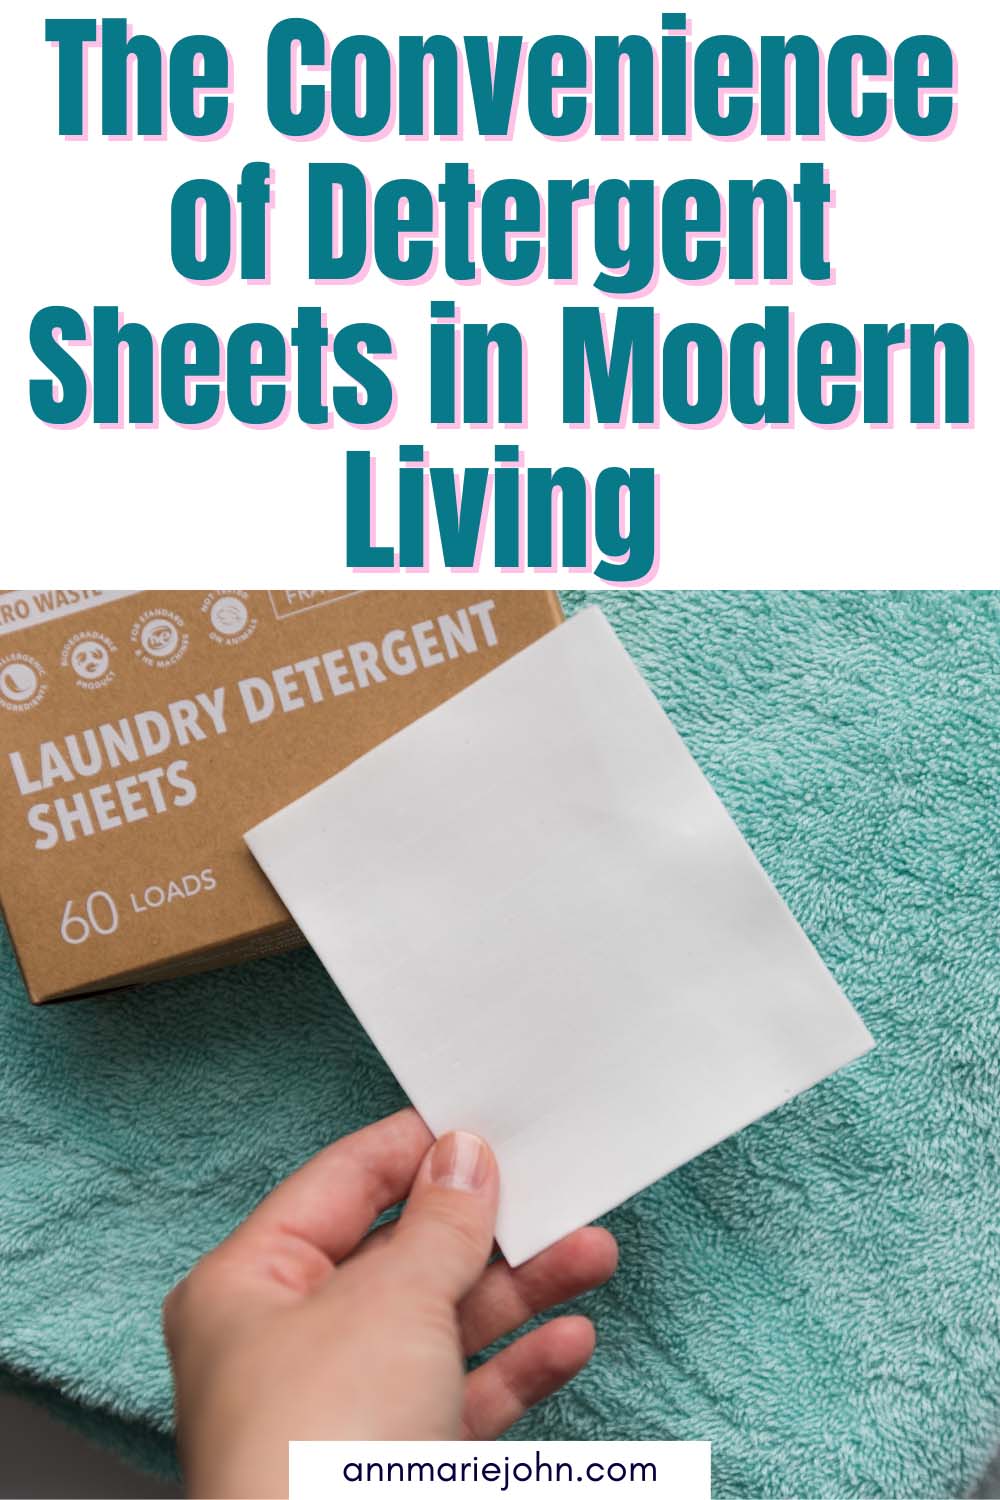 The Convenience of Detergent Sheets in Modern Living